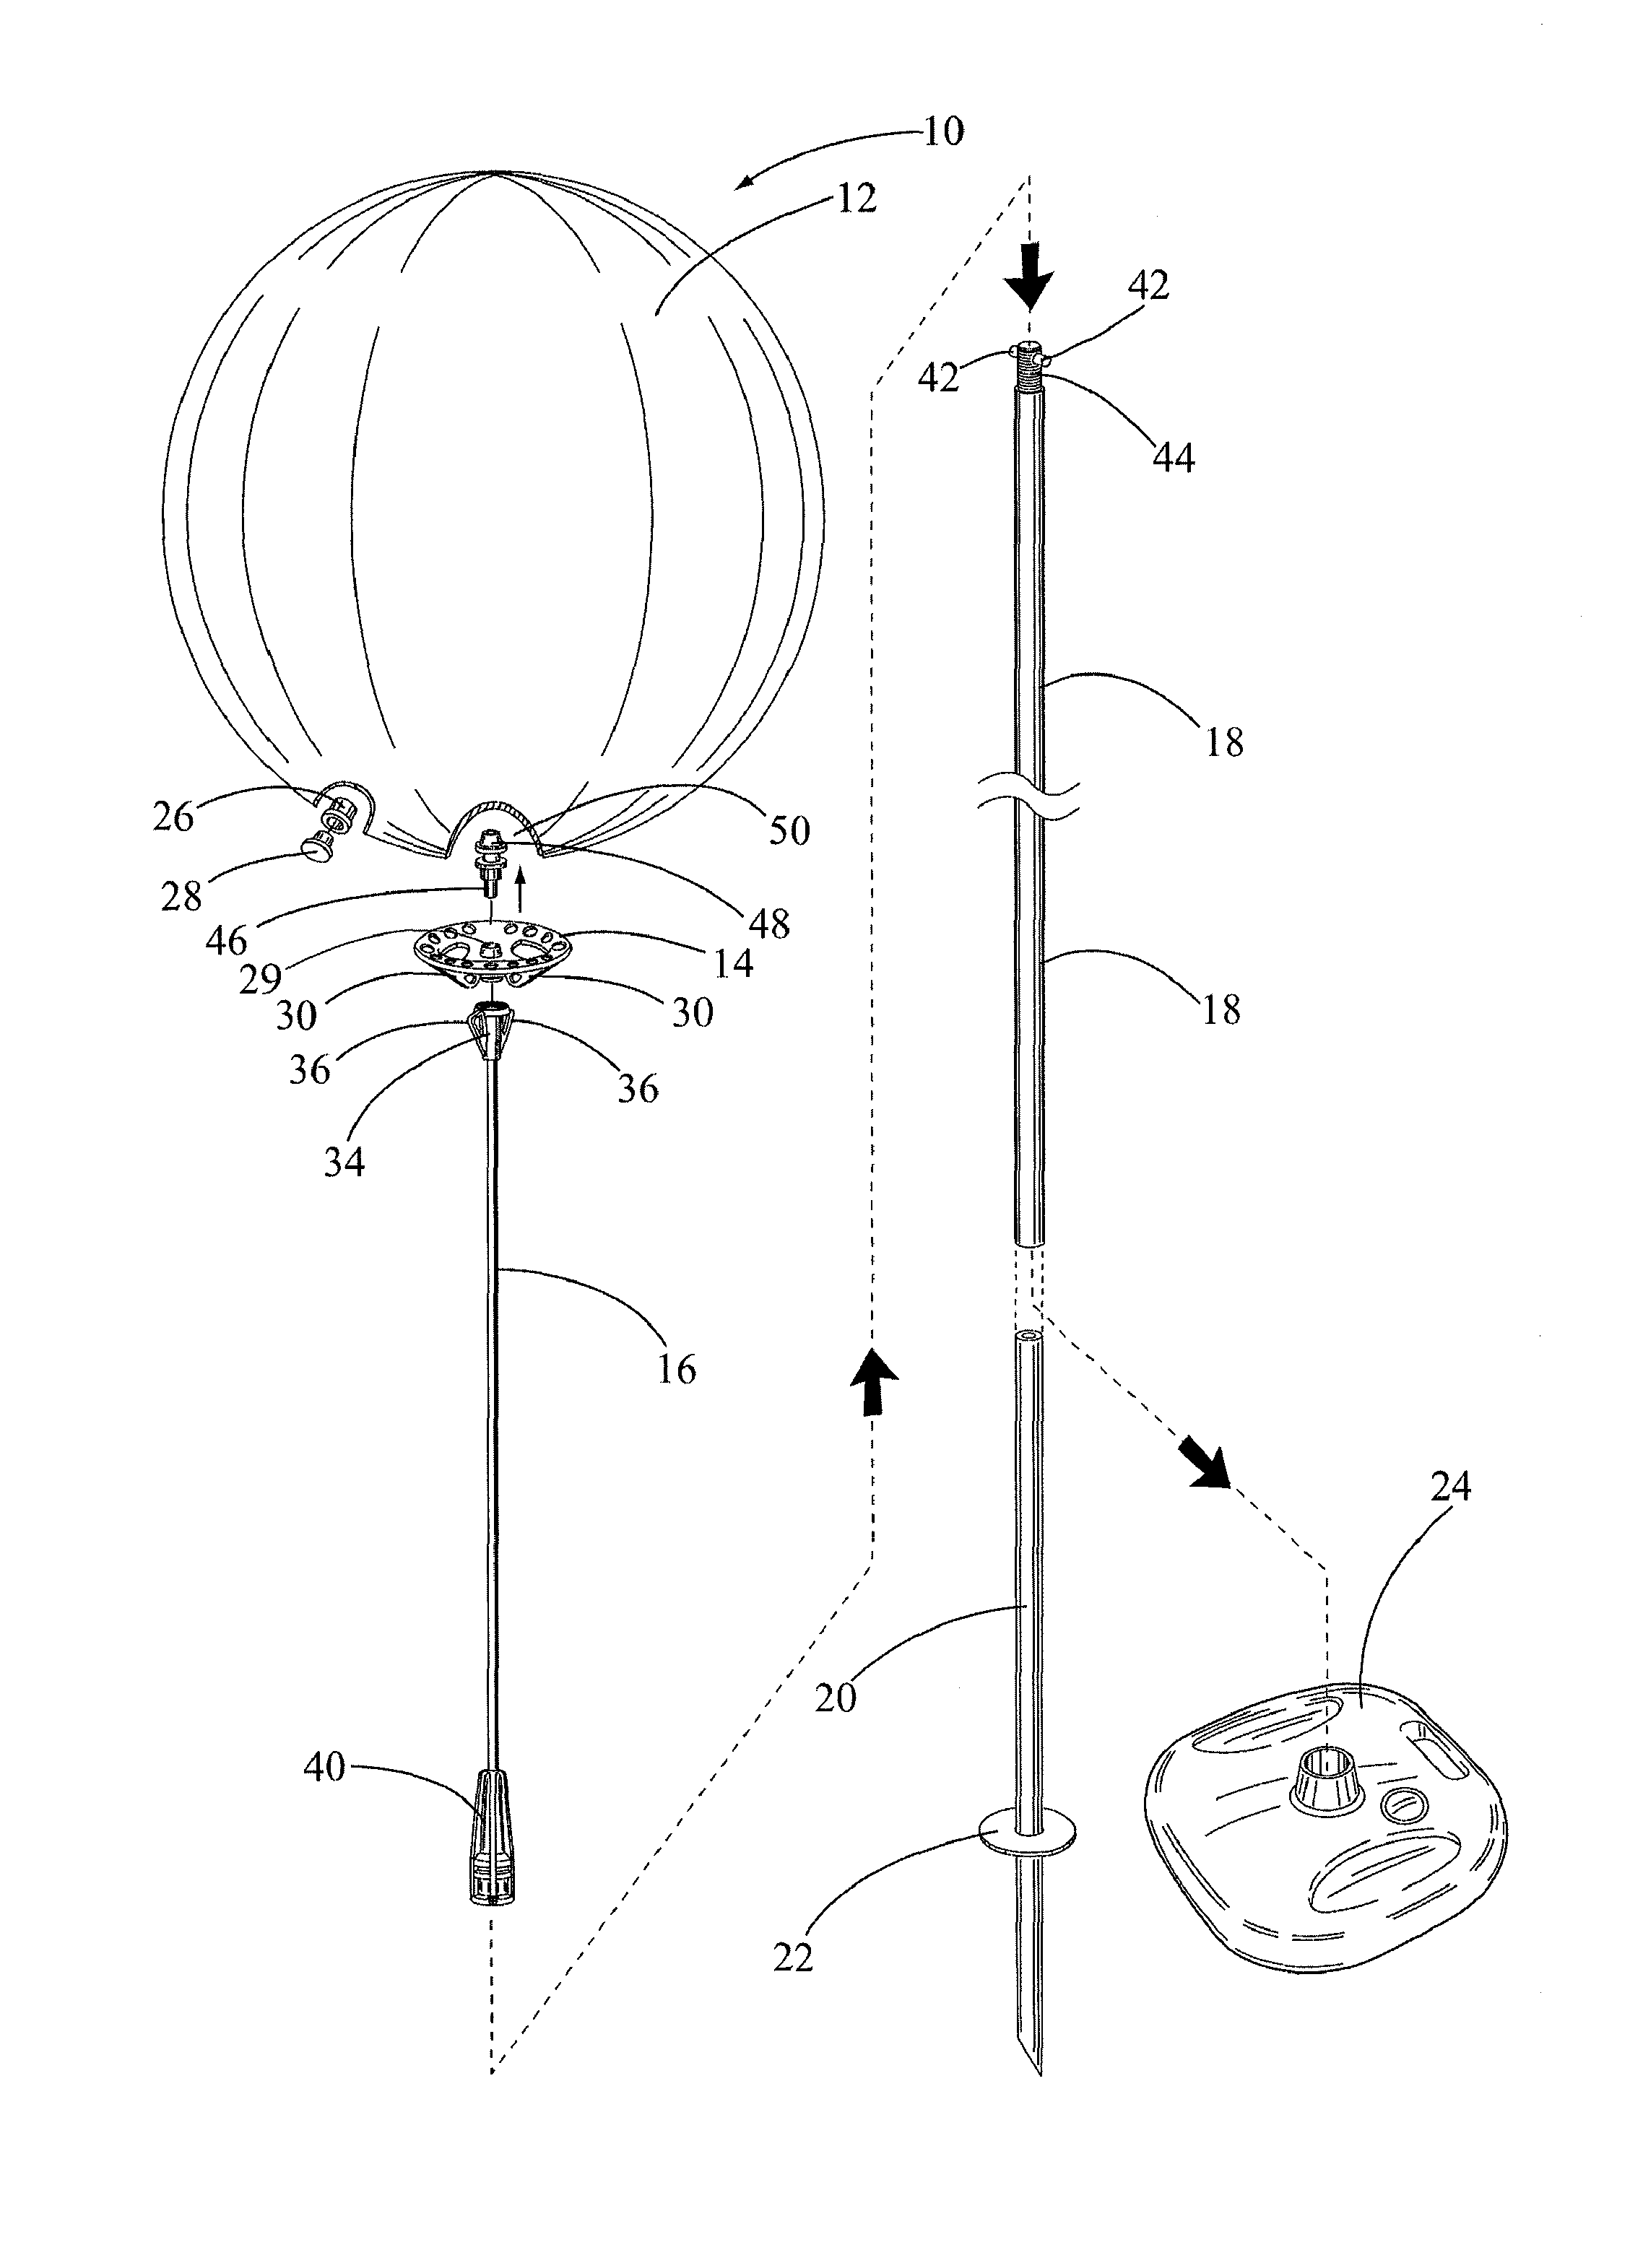 Balloon display system with inflatable balloon, balloon holder cup and flexible rod with mounting pole